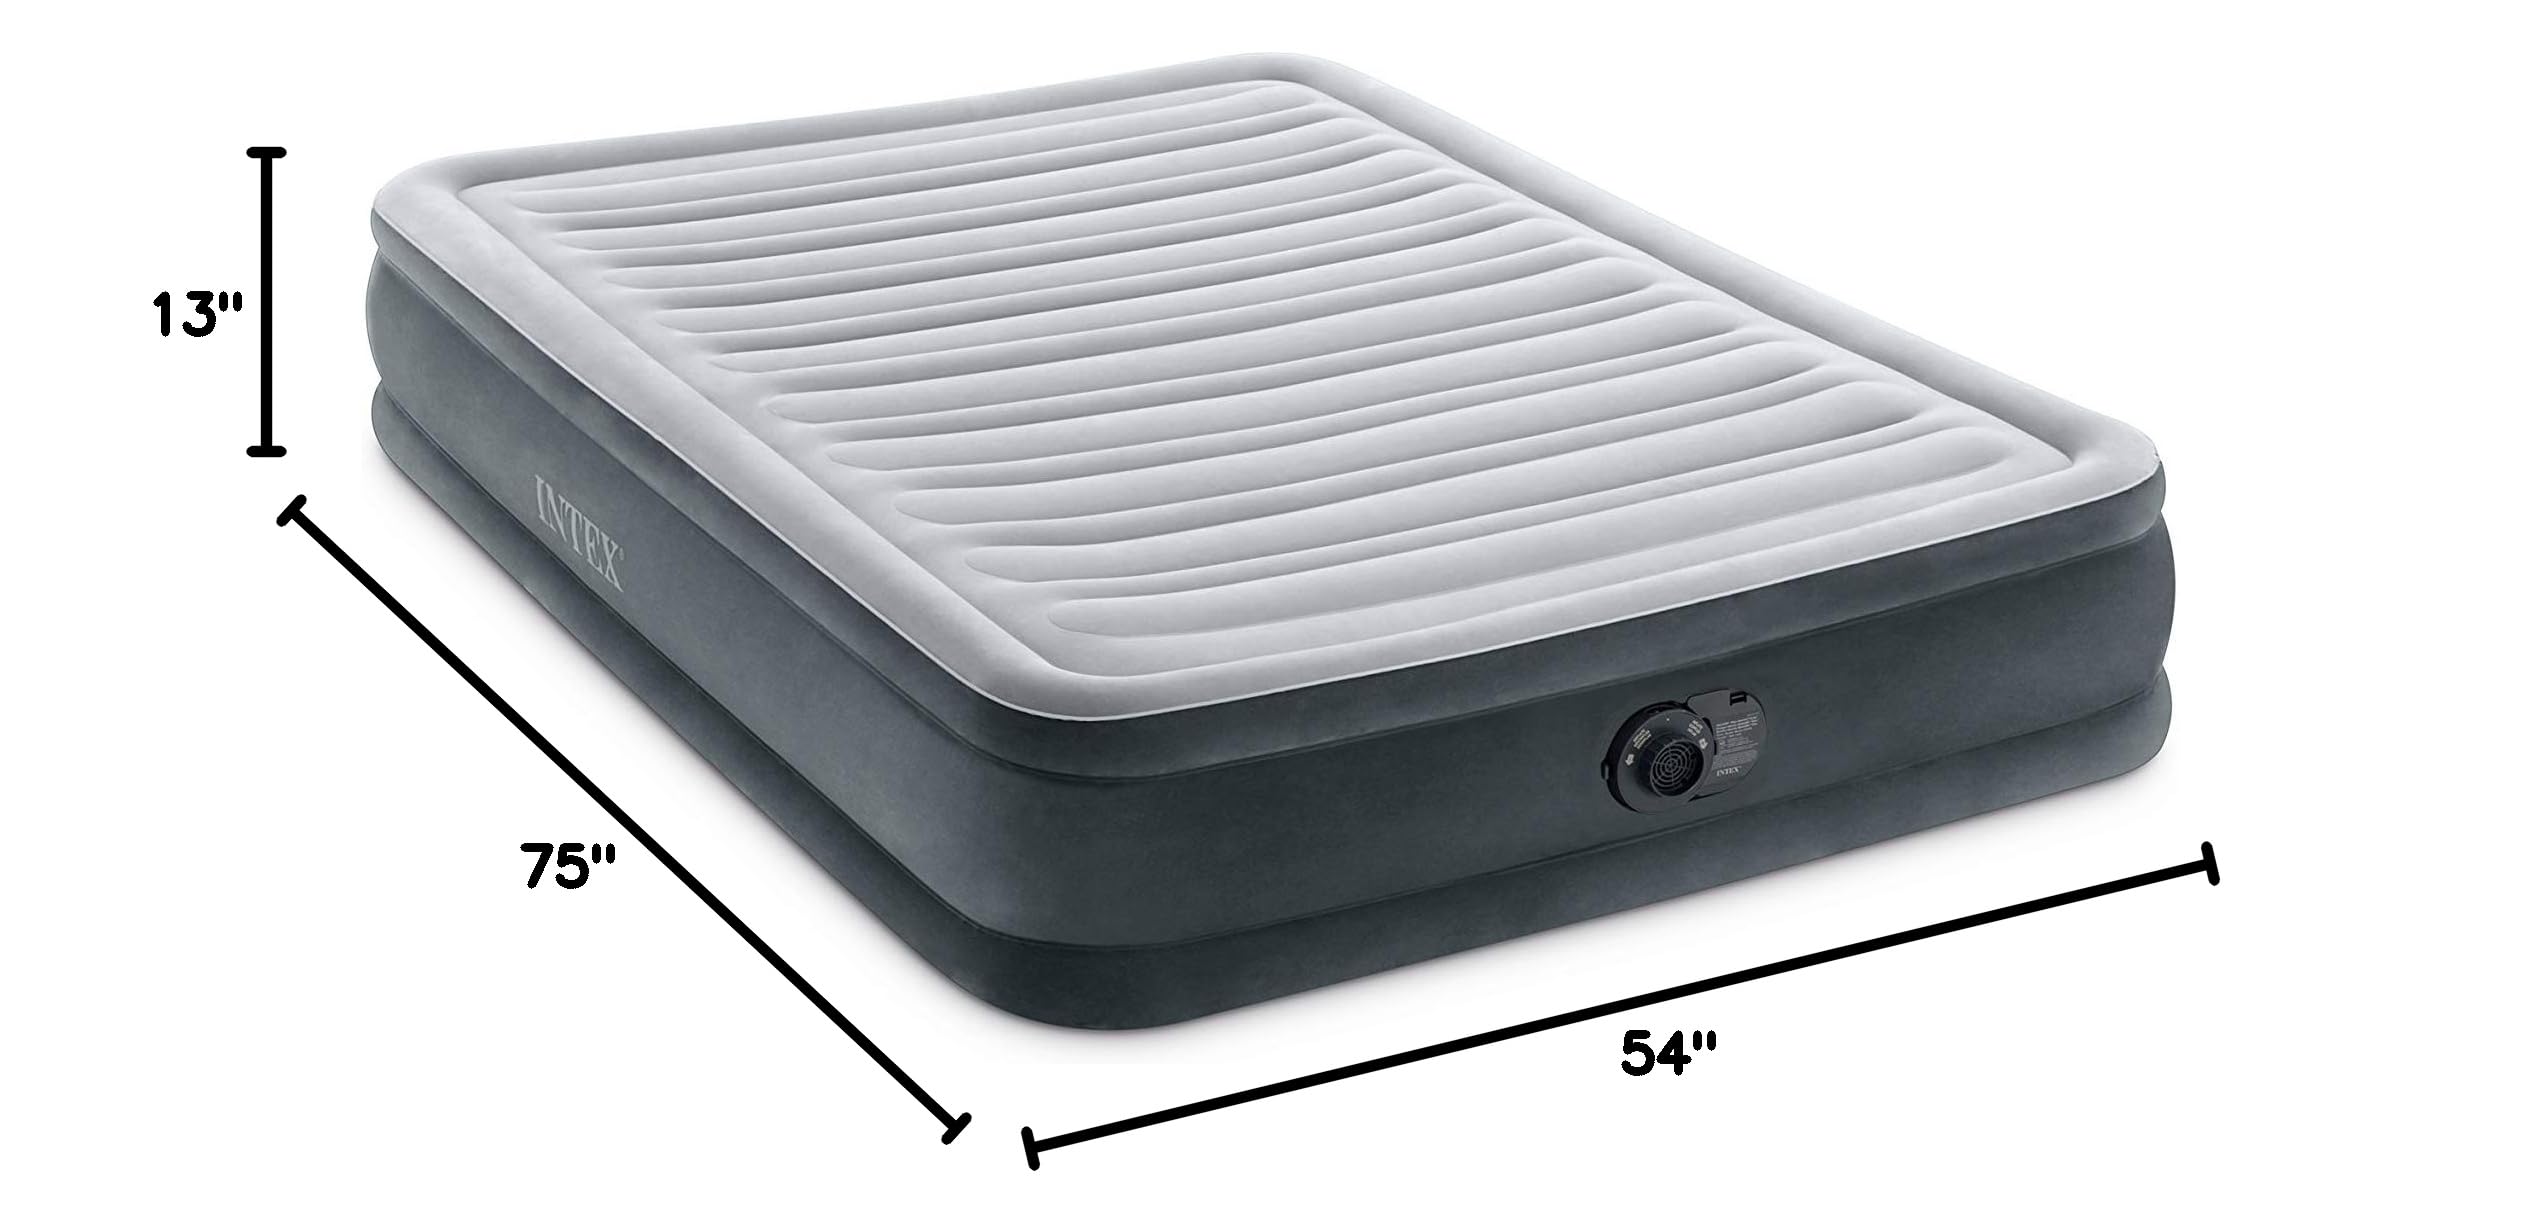 INTEX 67767ED Dura-Beam Deluxe Comfort-Plush Mid-Rise Air Mattress: Fiber-Tech – Full Size – Built-in Electric Pump – 13in Bed Height – 600lb Weight Capacity,Grey